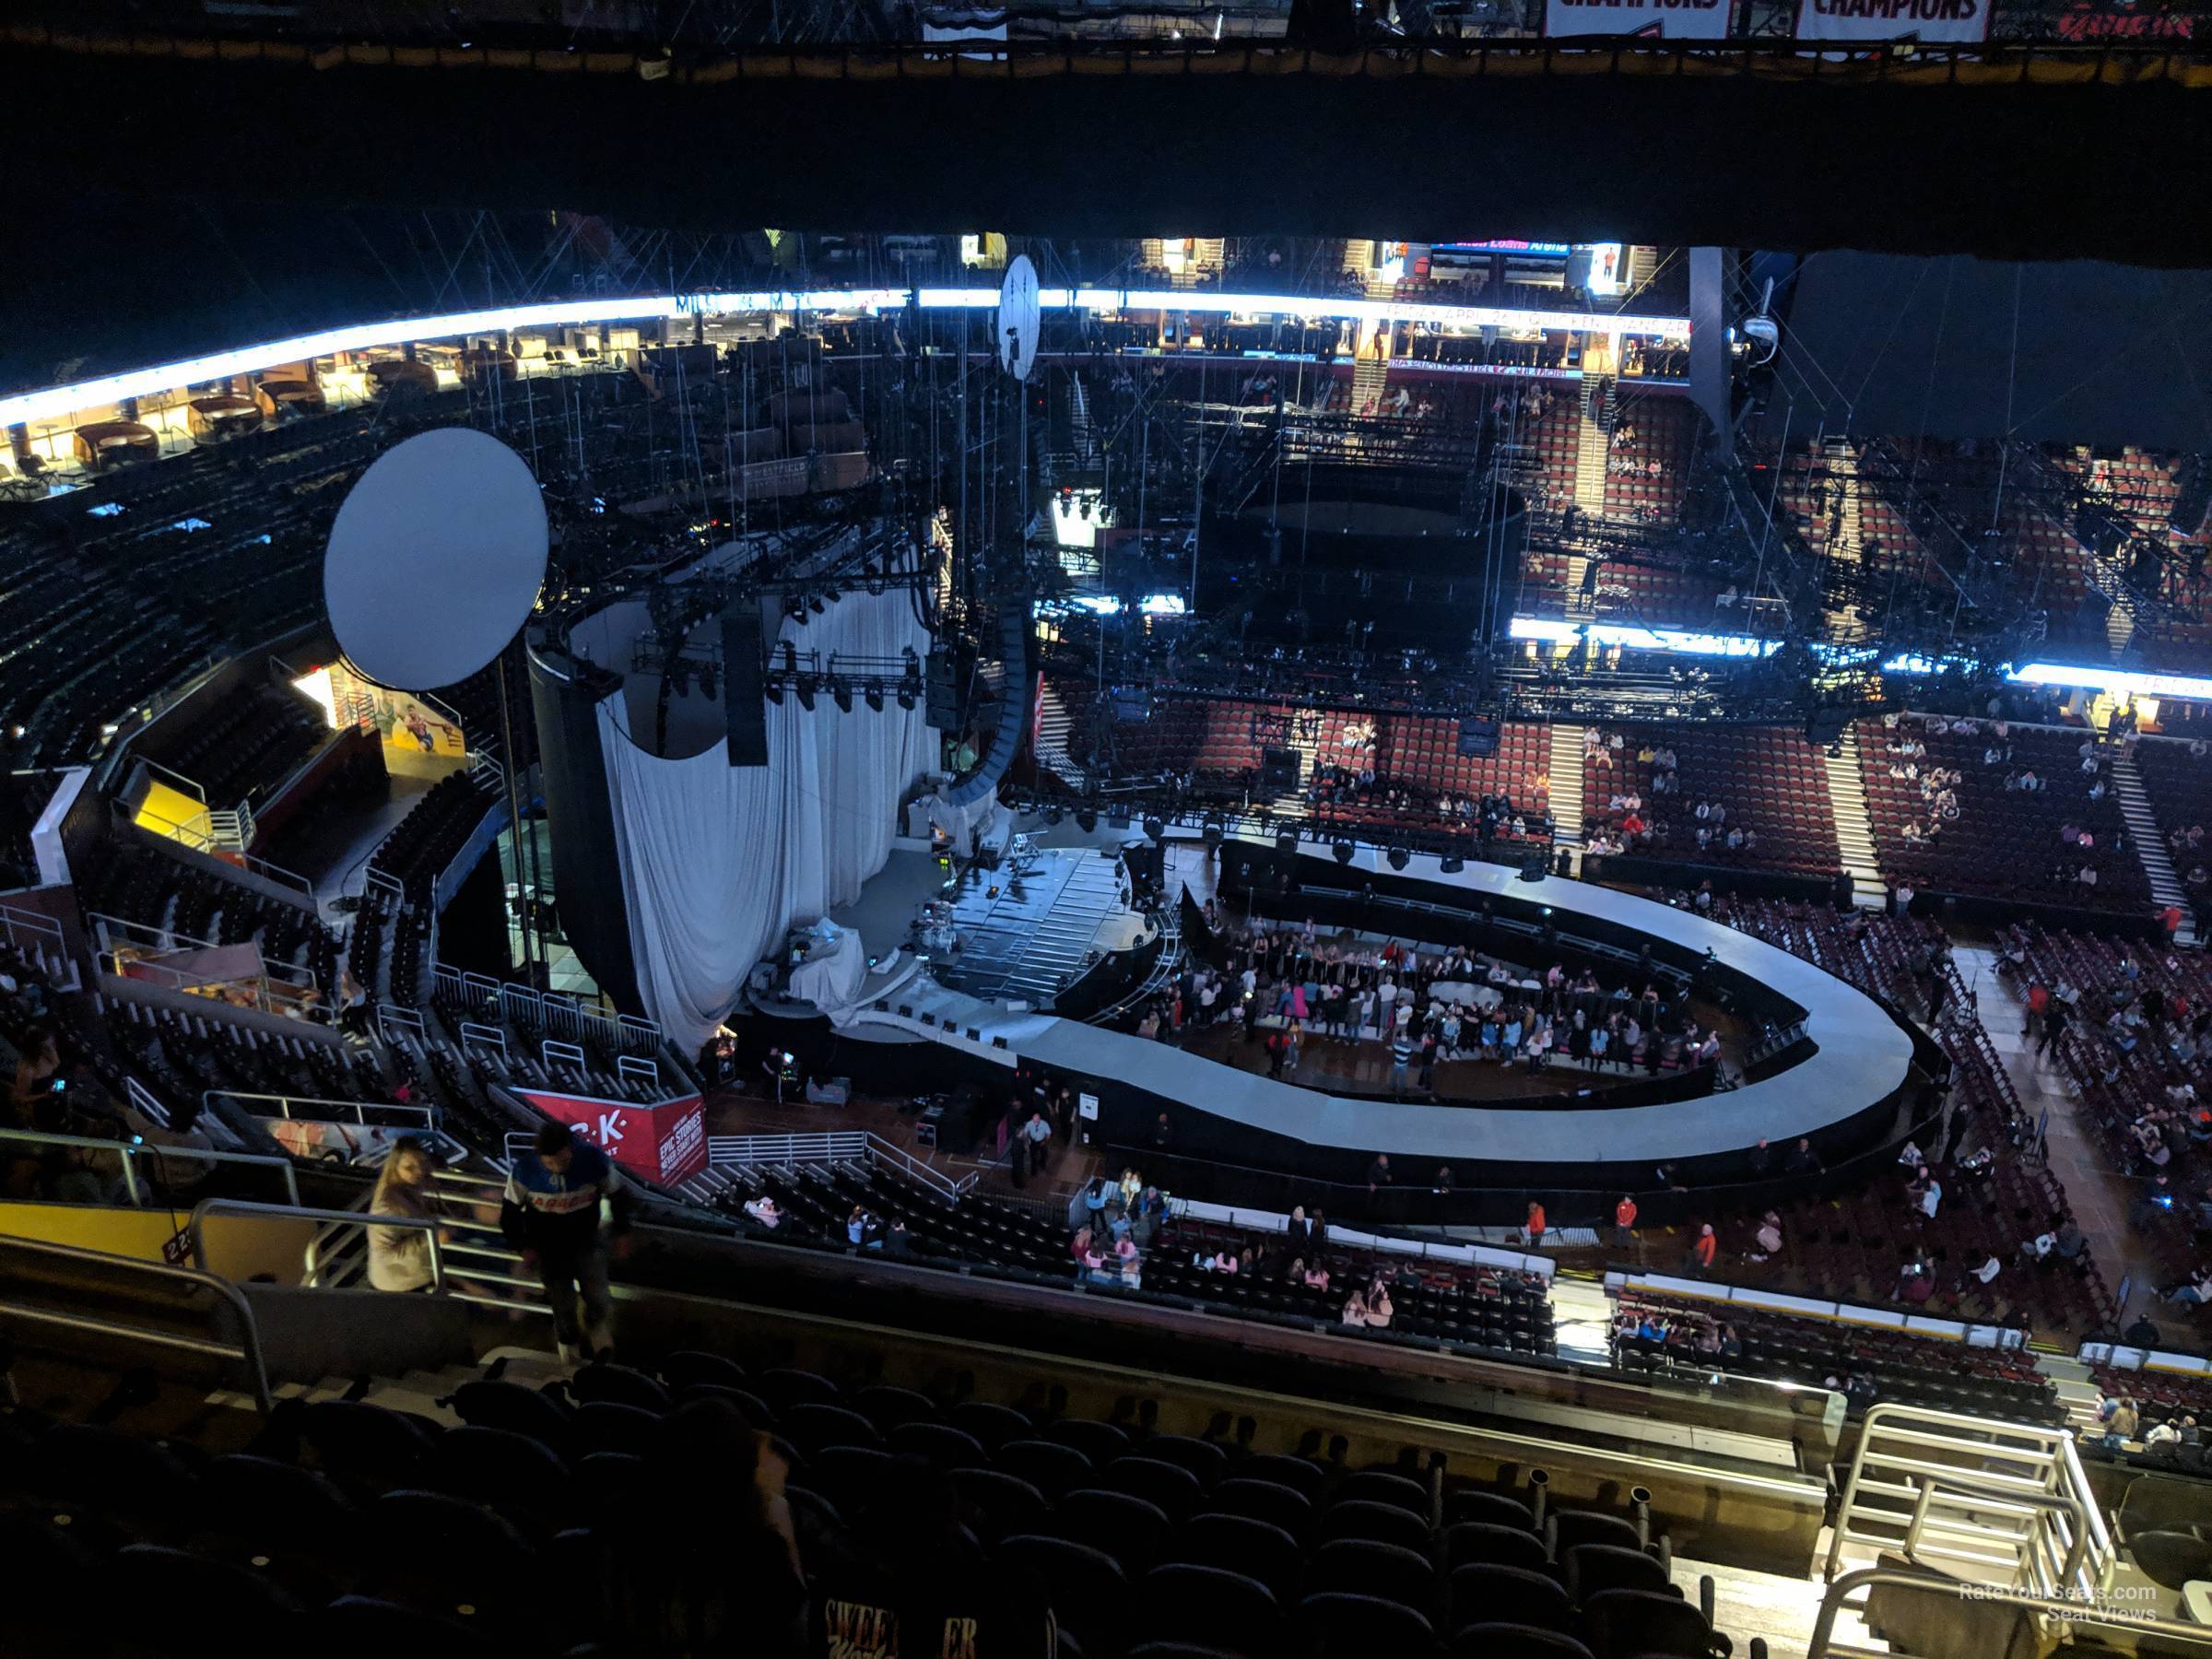 section 211, row 15 seat view  for concert - rocket mortgage fieldhouse